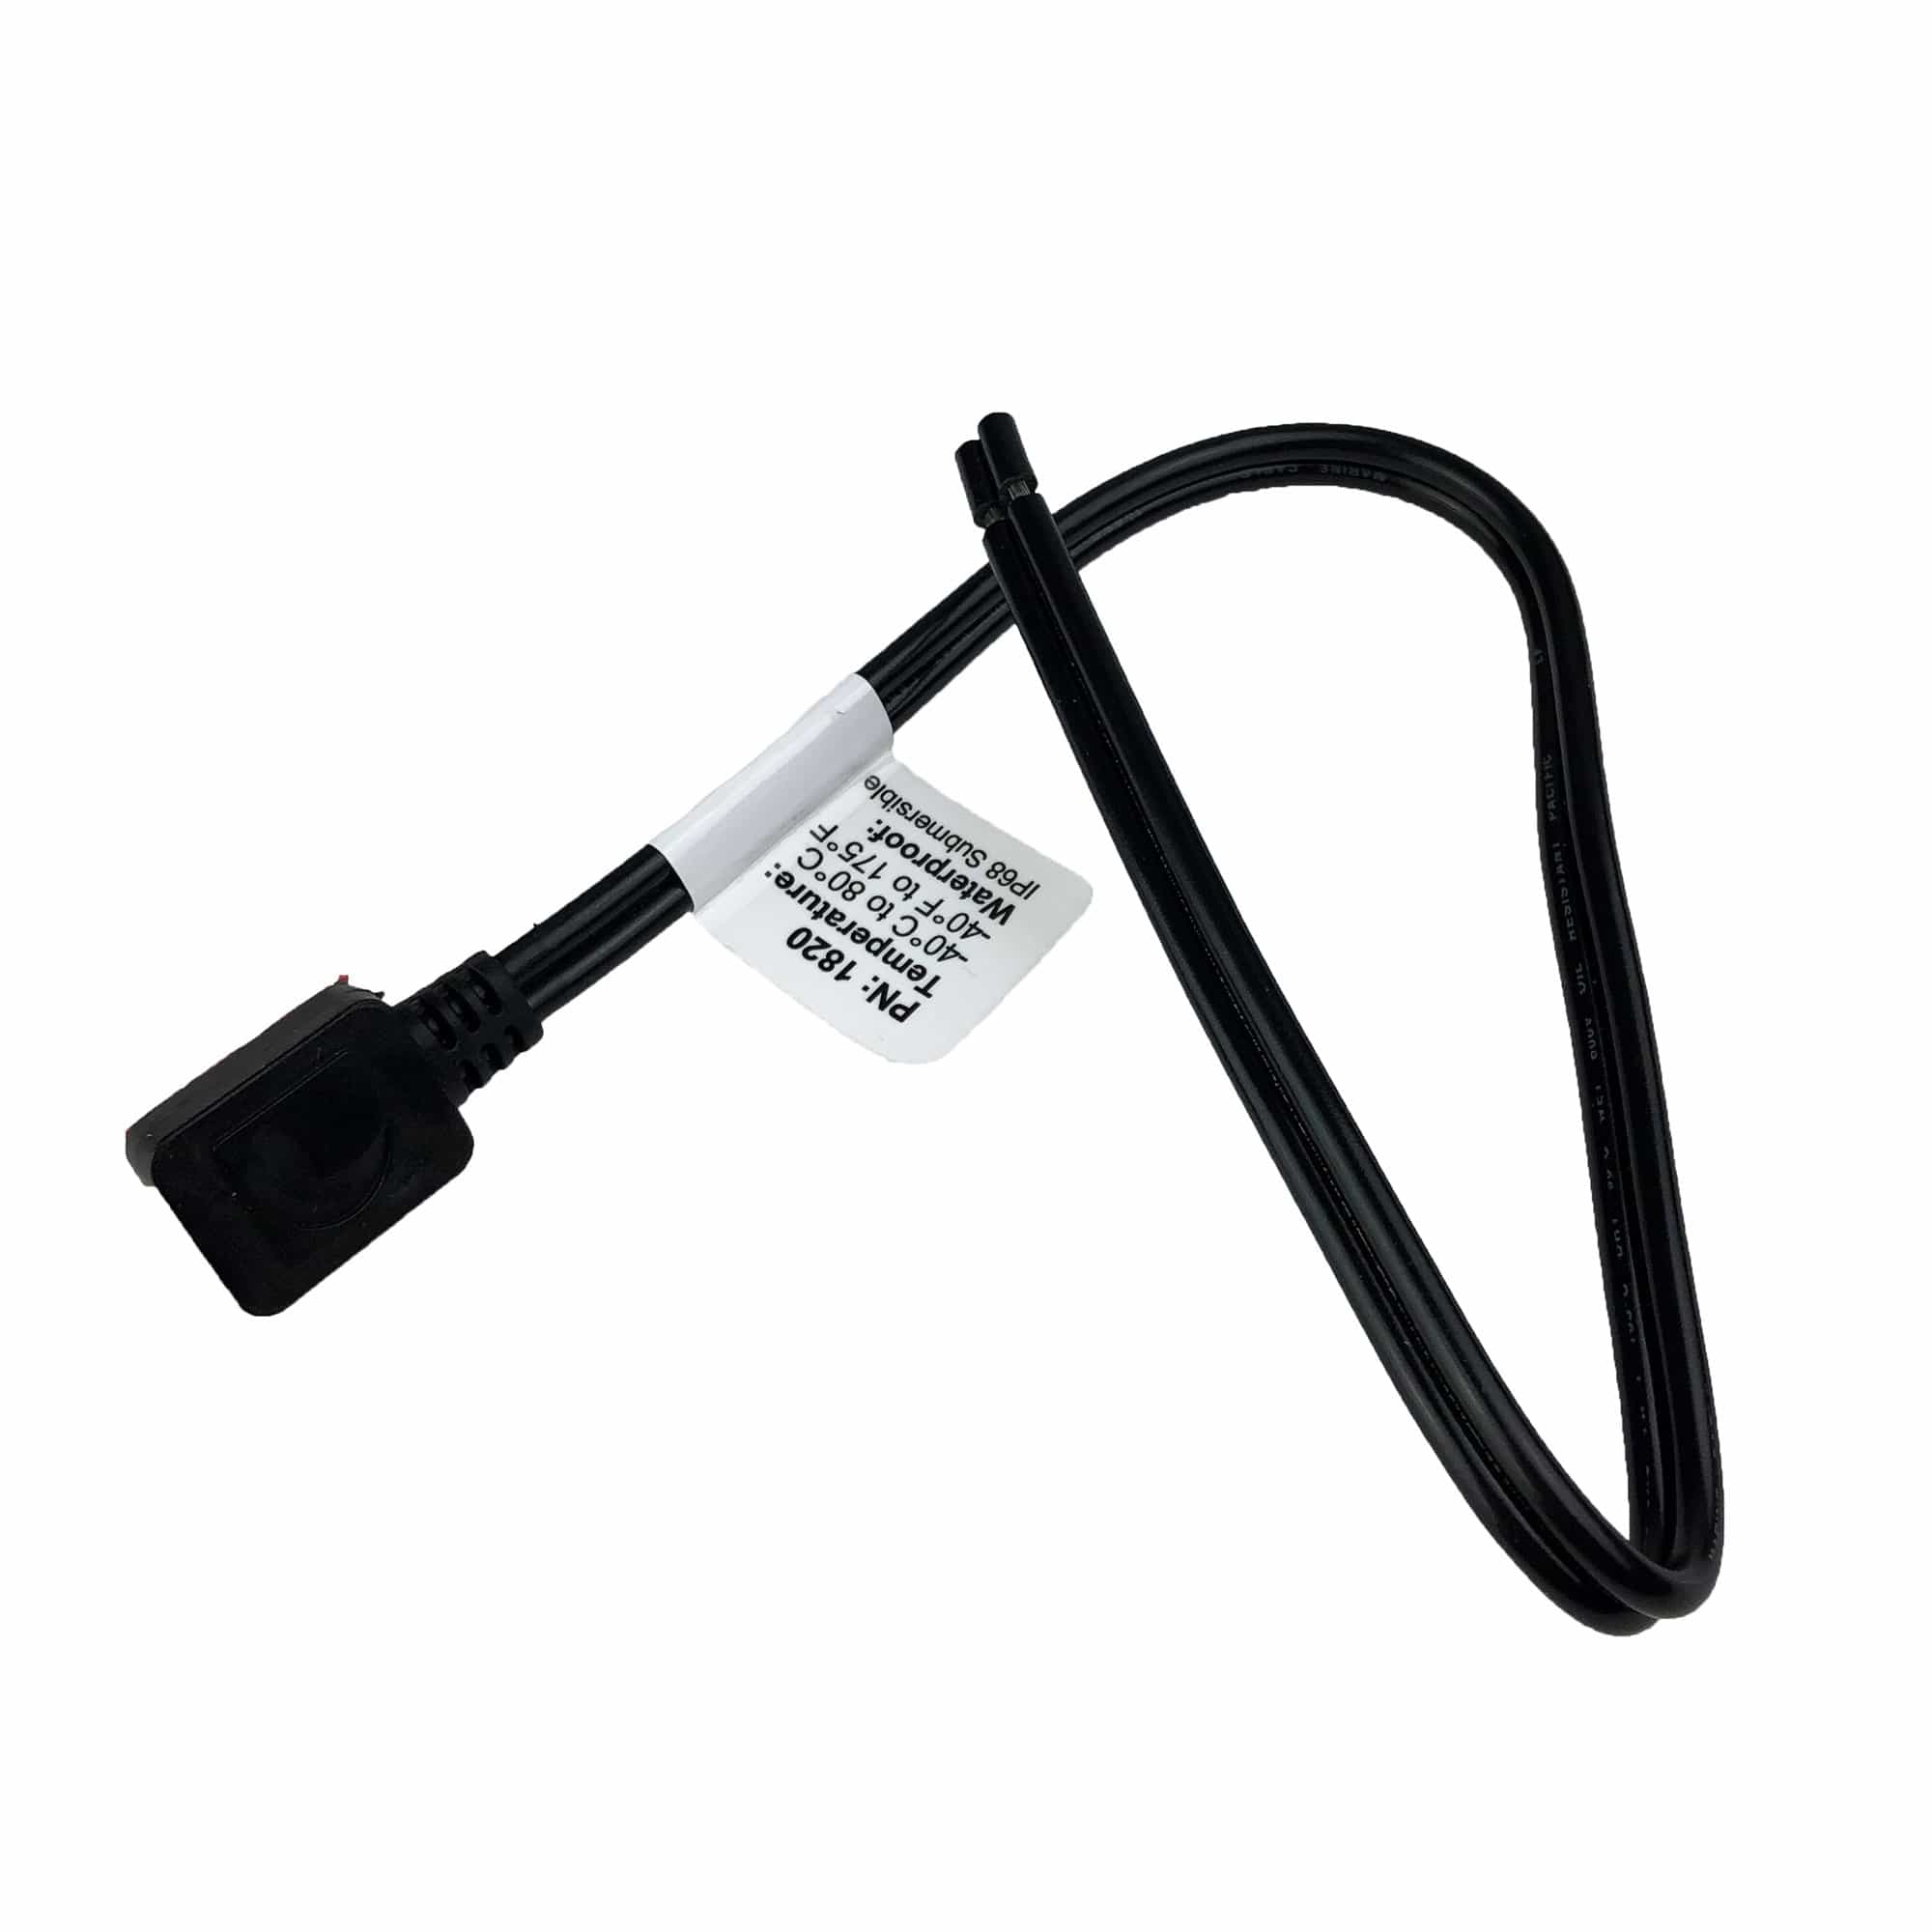 Blue Sea Systems 1820-BSS Power Products Submersible Temperature Sensor VSM 10k